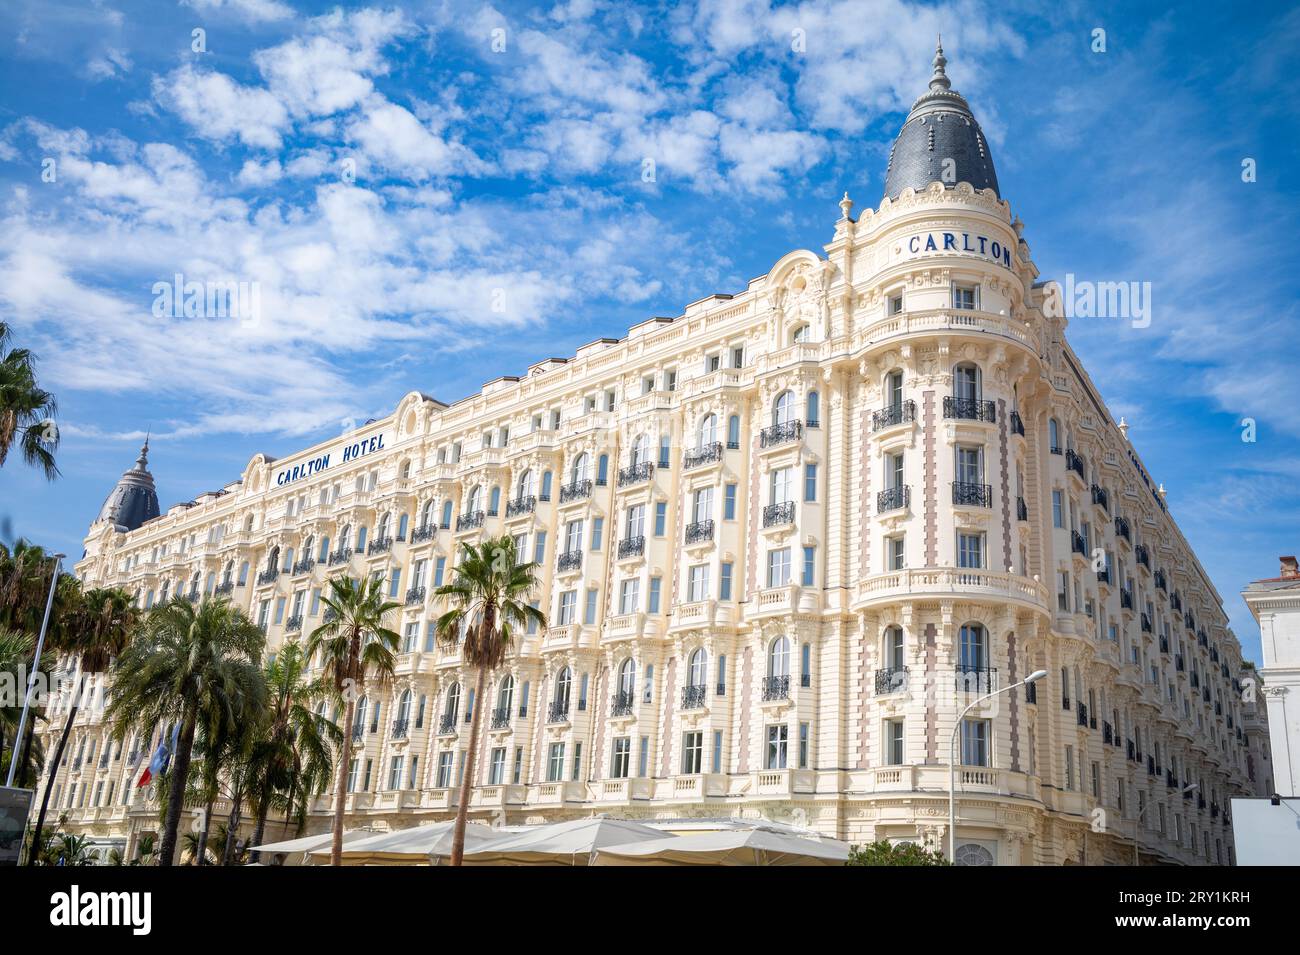 The luxury Carlton Hotel  located on the Boulevard de la Croisette, directly opposite the Mediterranean Sea, in Cannes, France. One of the most iconic Stock Photo